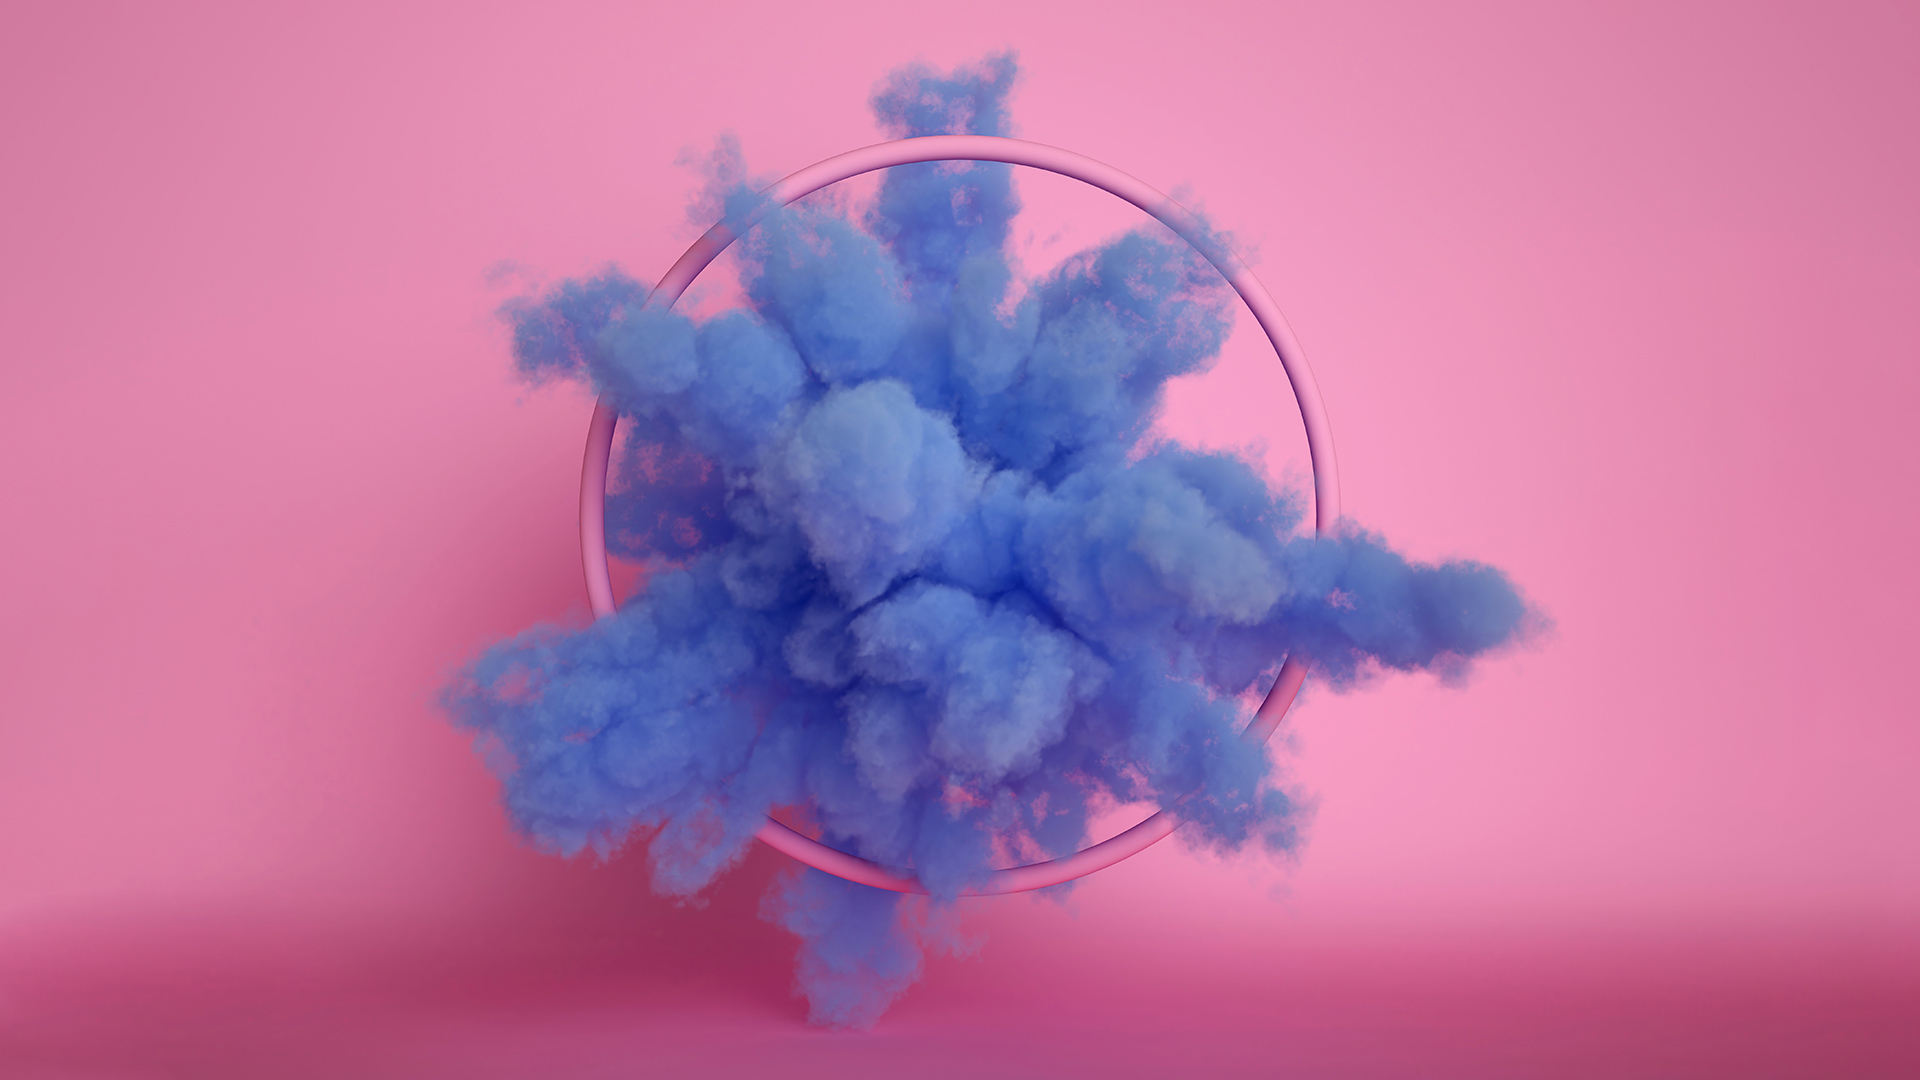 Blue cloud breaking through a pink hula hoop on a pink background